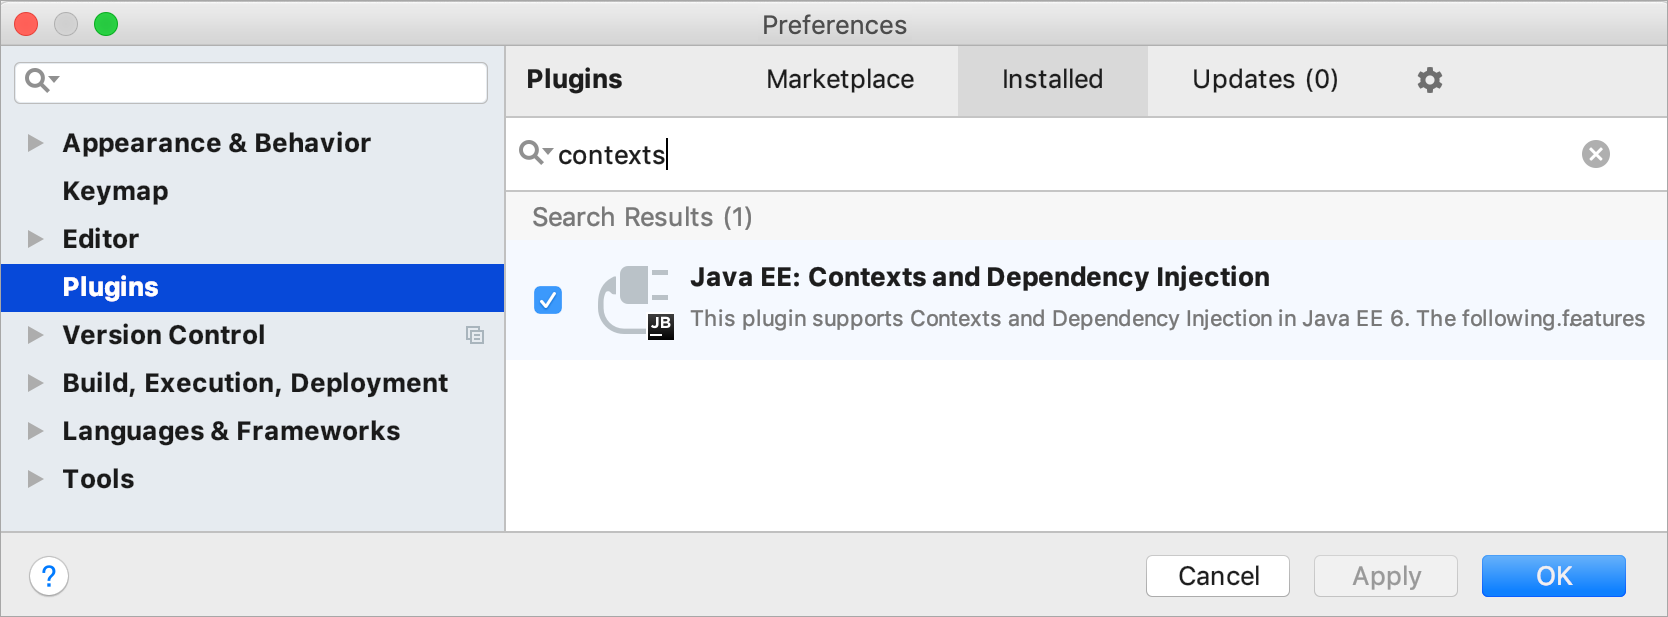 CDI plugin is enabled in the list of plugins